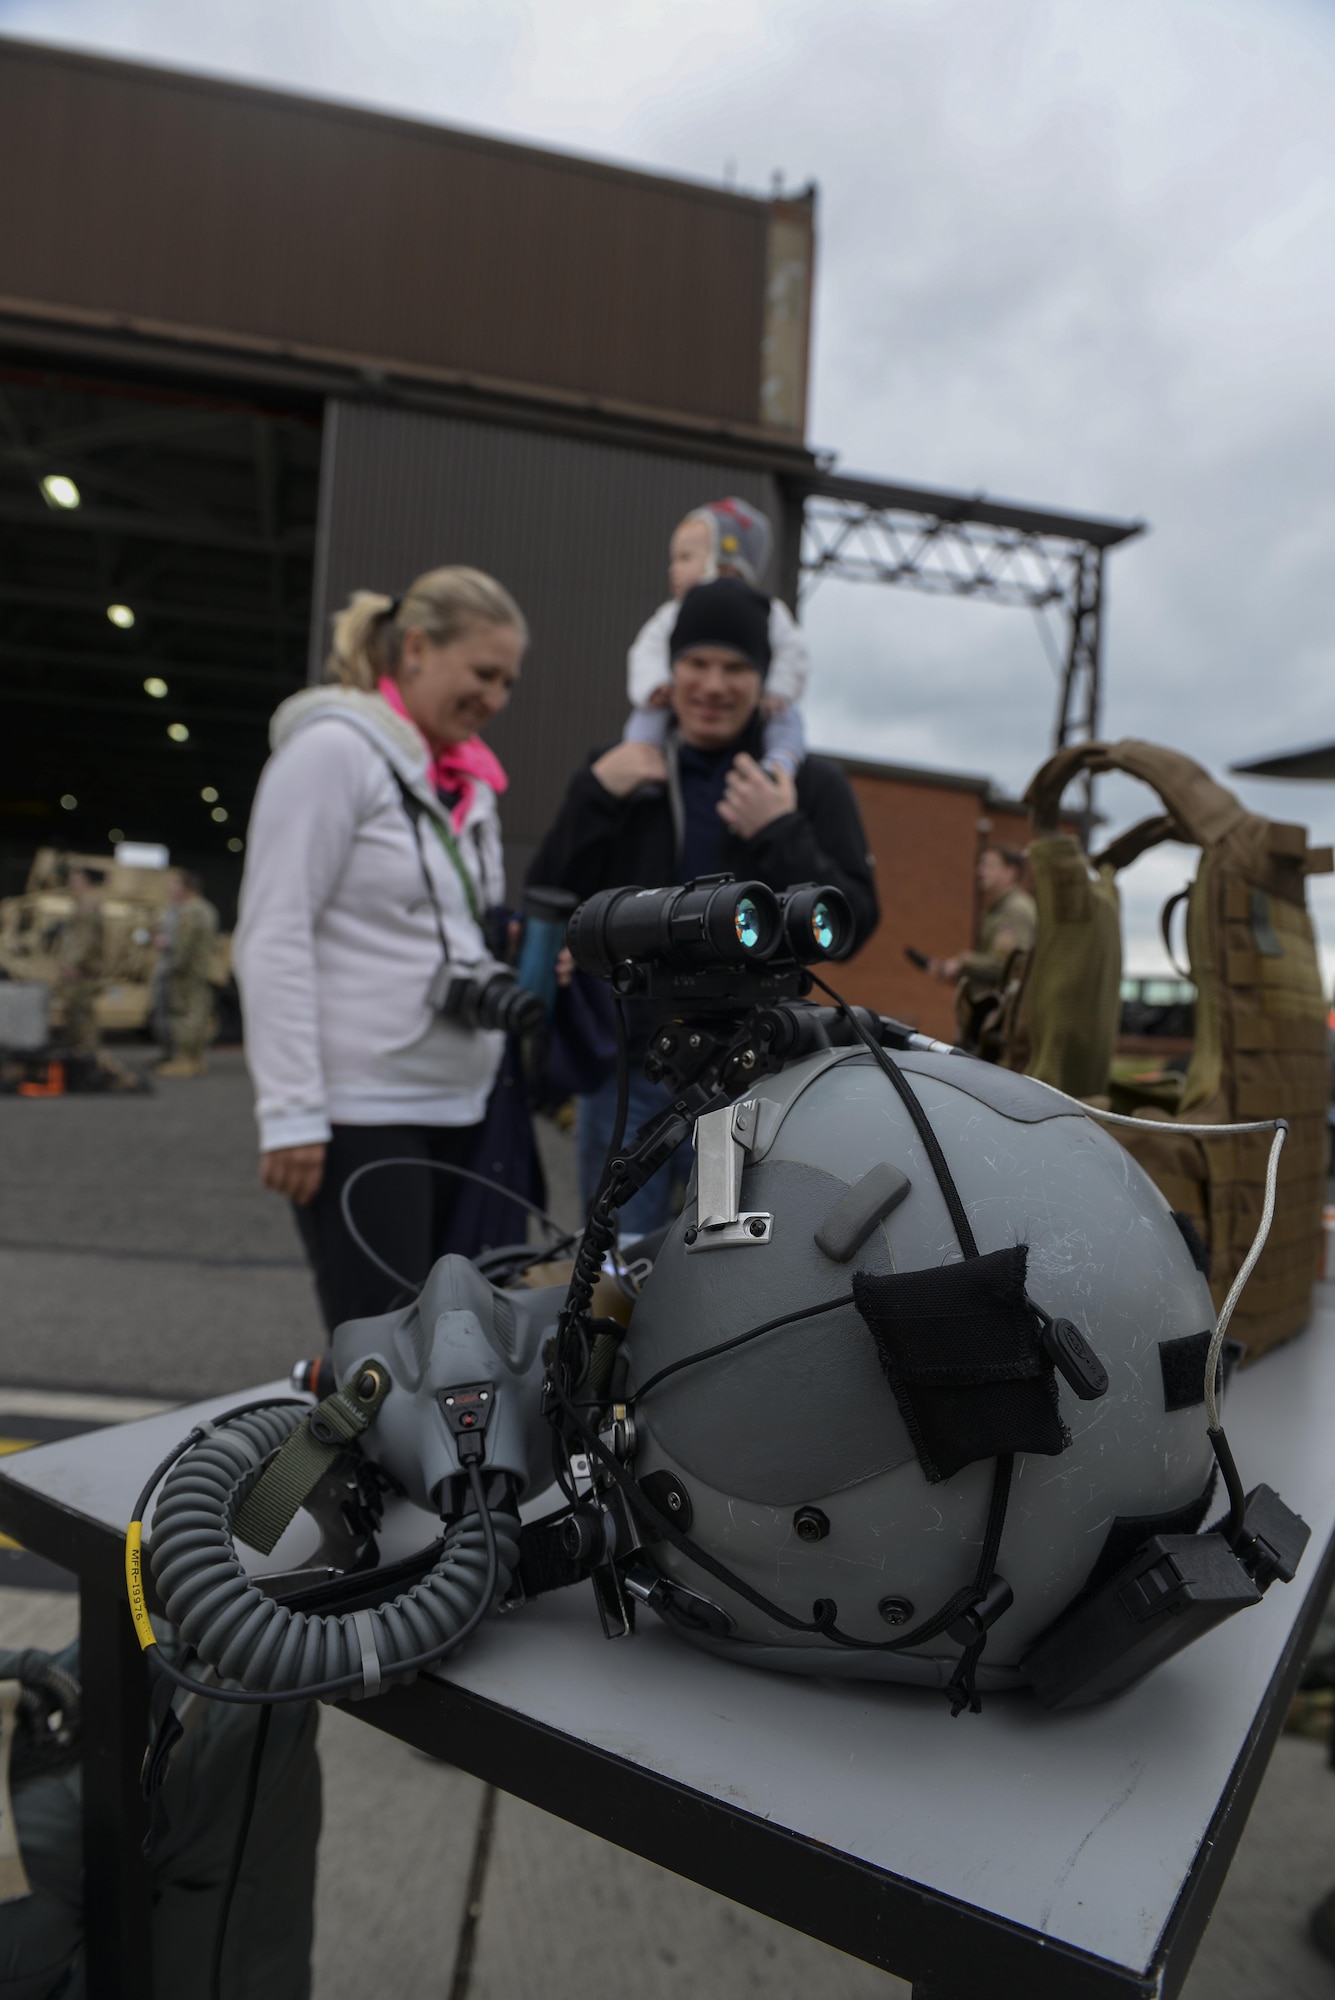 Participants of the 352nd Special Operations Wing Spouses’ Day look at a life support equipment display May 26, 2016, on RAF Mildenhall, England. During the day, Airmen and their families were able to view various displays along with a fast-rope demonstration. (U.S. Air Force photo by Staff Sgt. Micaiah Anthony/Released)